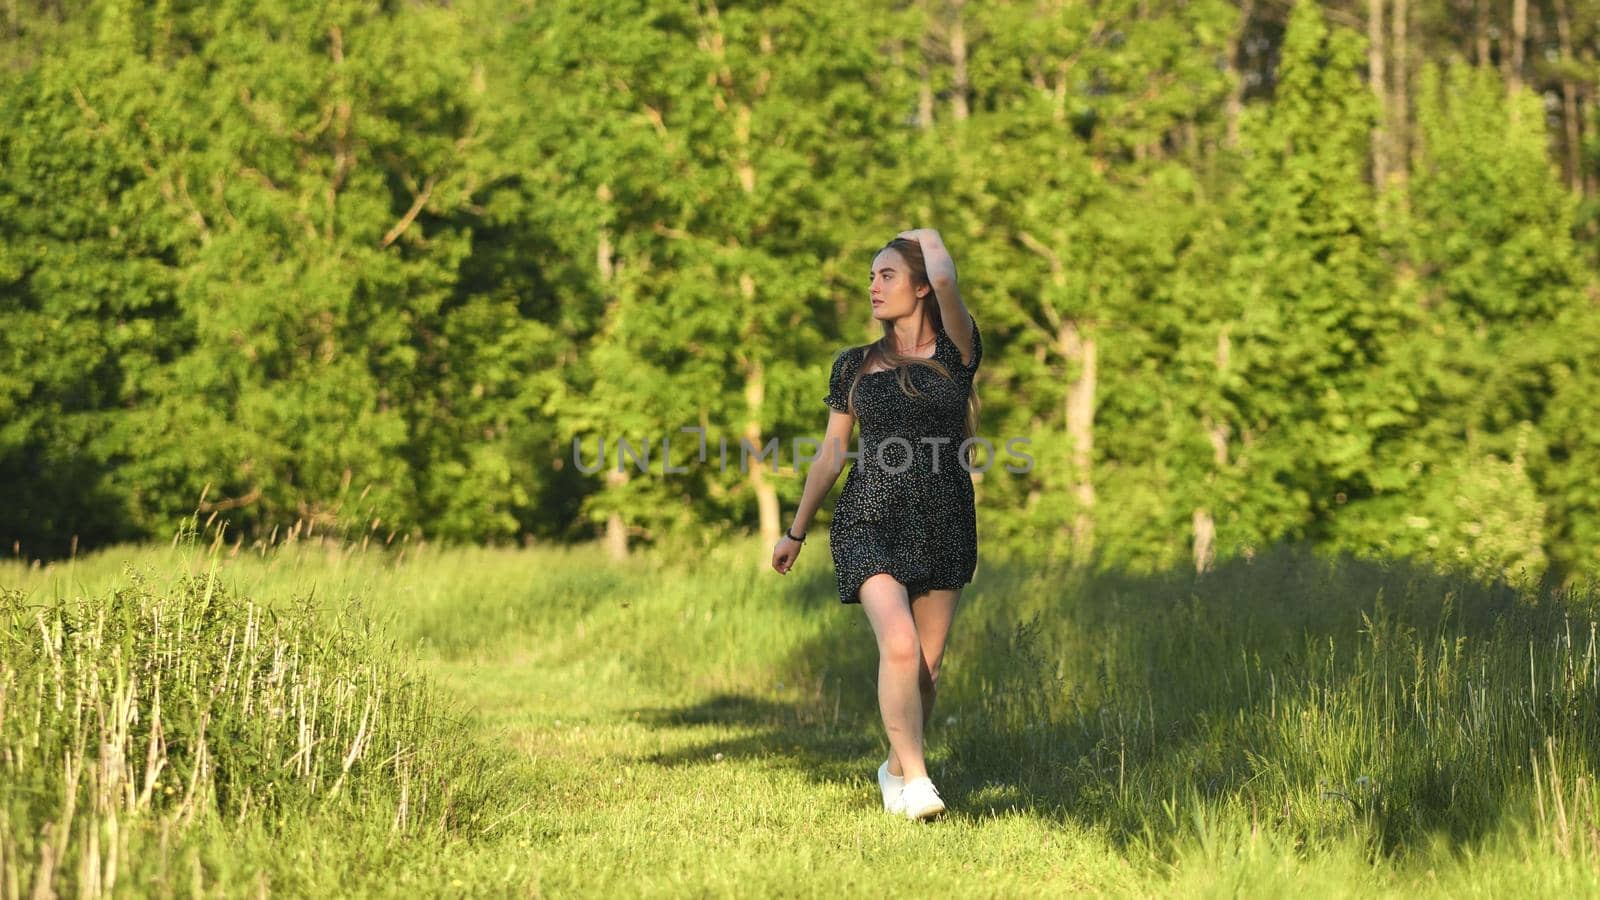 A young girl runs in a meadow on a warm summer evening. by DovidPro